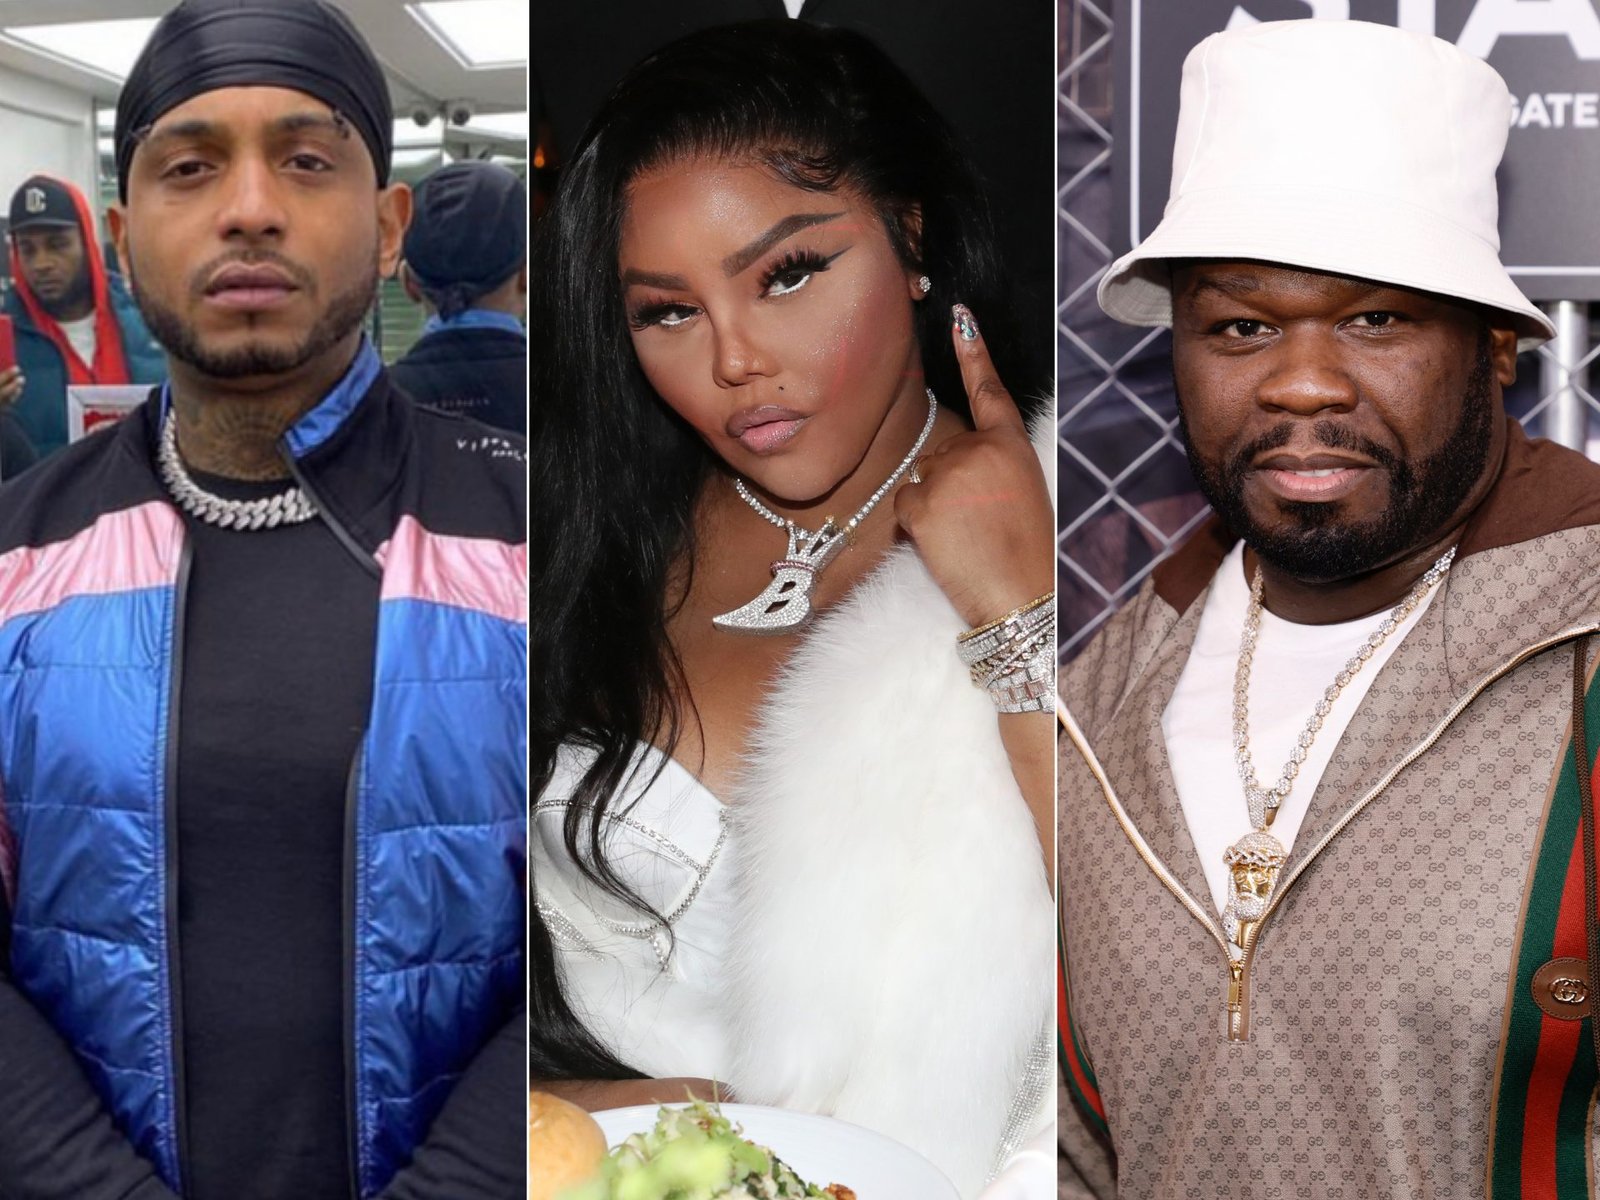 Mr. Papers Calls Out 50 Cent For Talking On His Daughter’s Search & Says Lil Kim’s Verse On The ‘Blueprint B’ Remix Became About Him